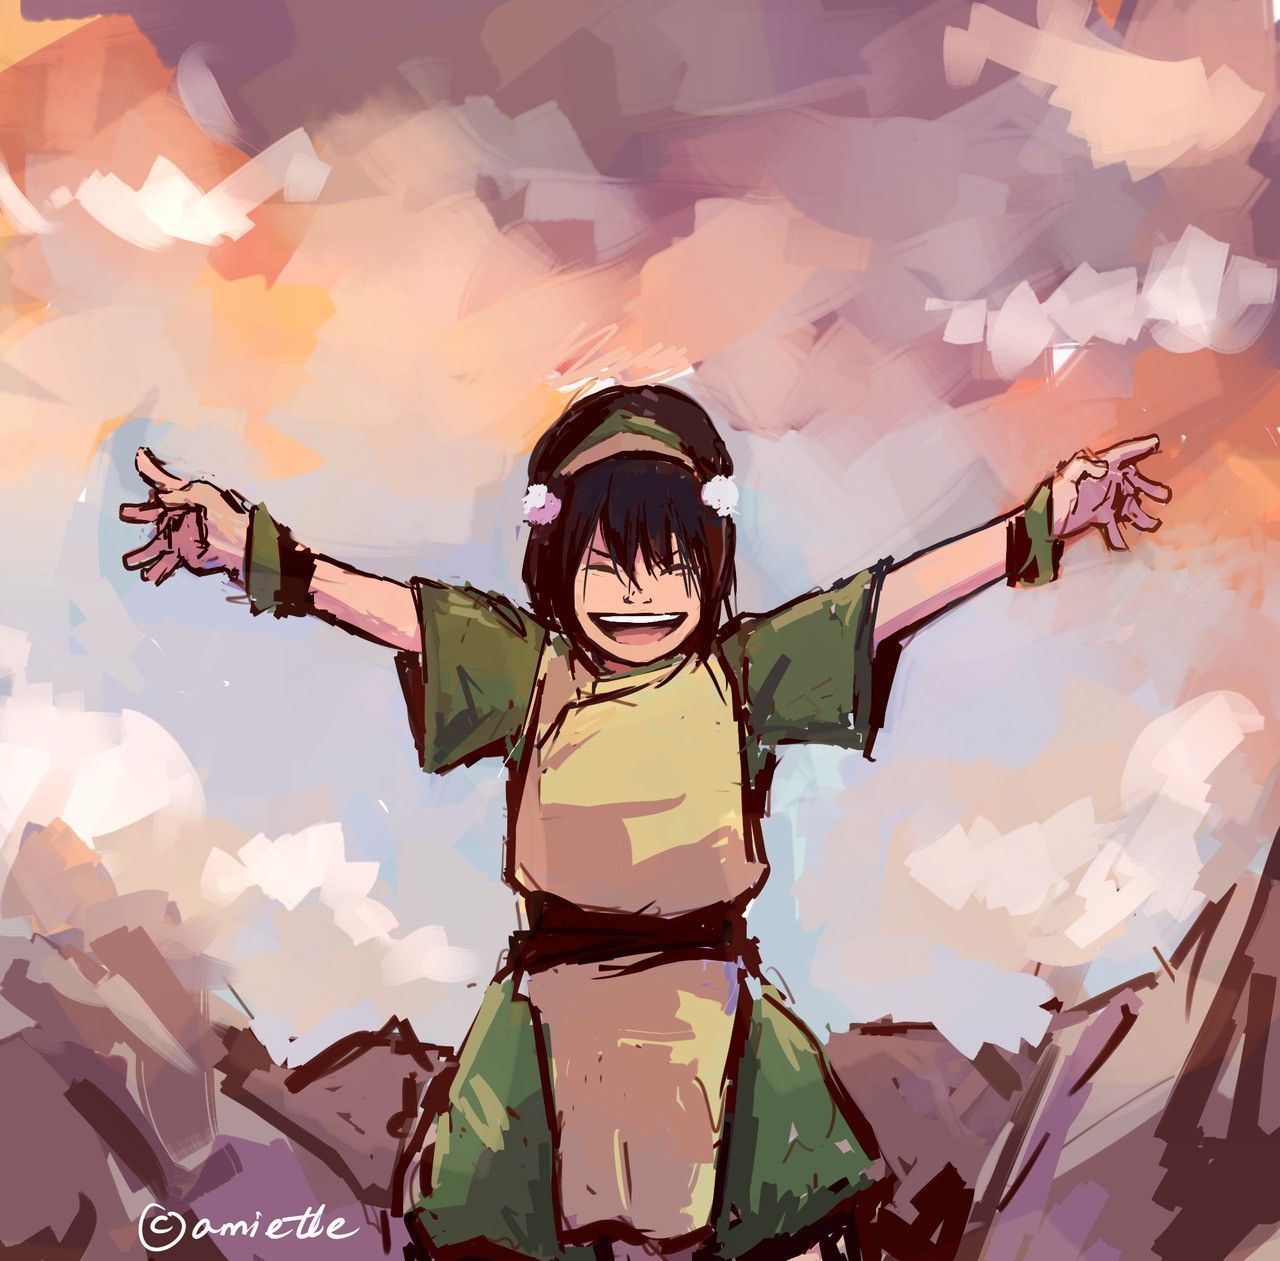 All Hail the Melon Lord. Avatar airbender, Avatar characters, Avatar the last airbender